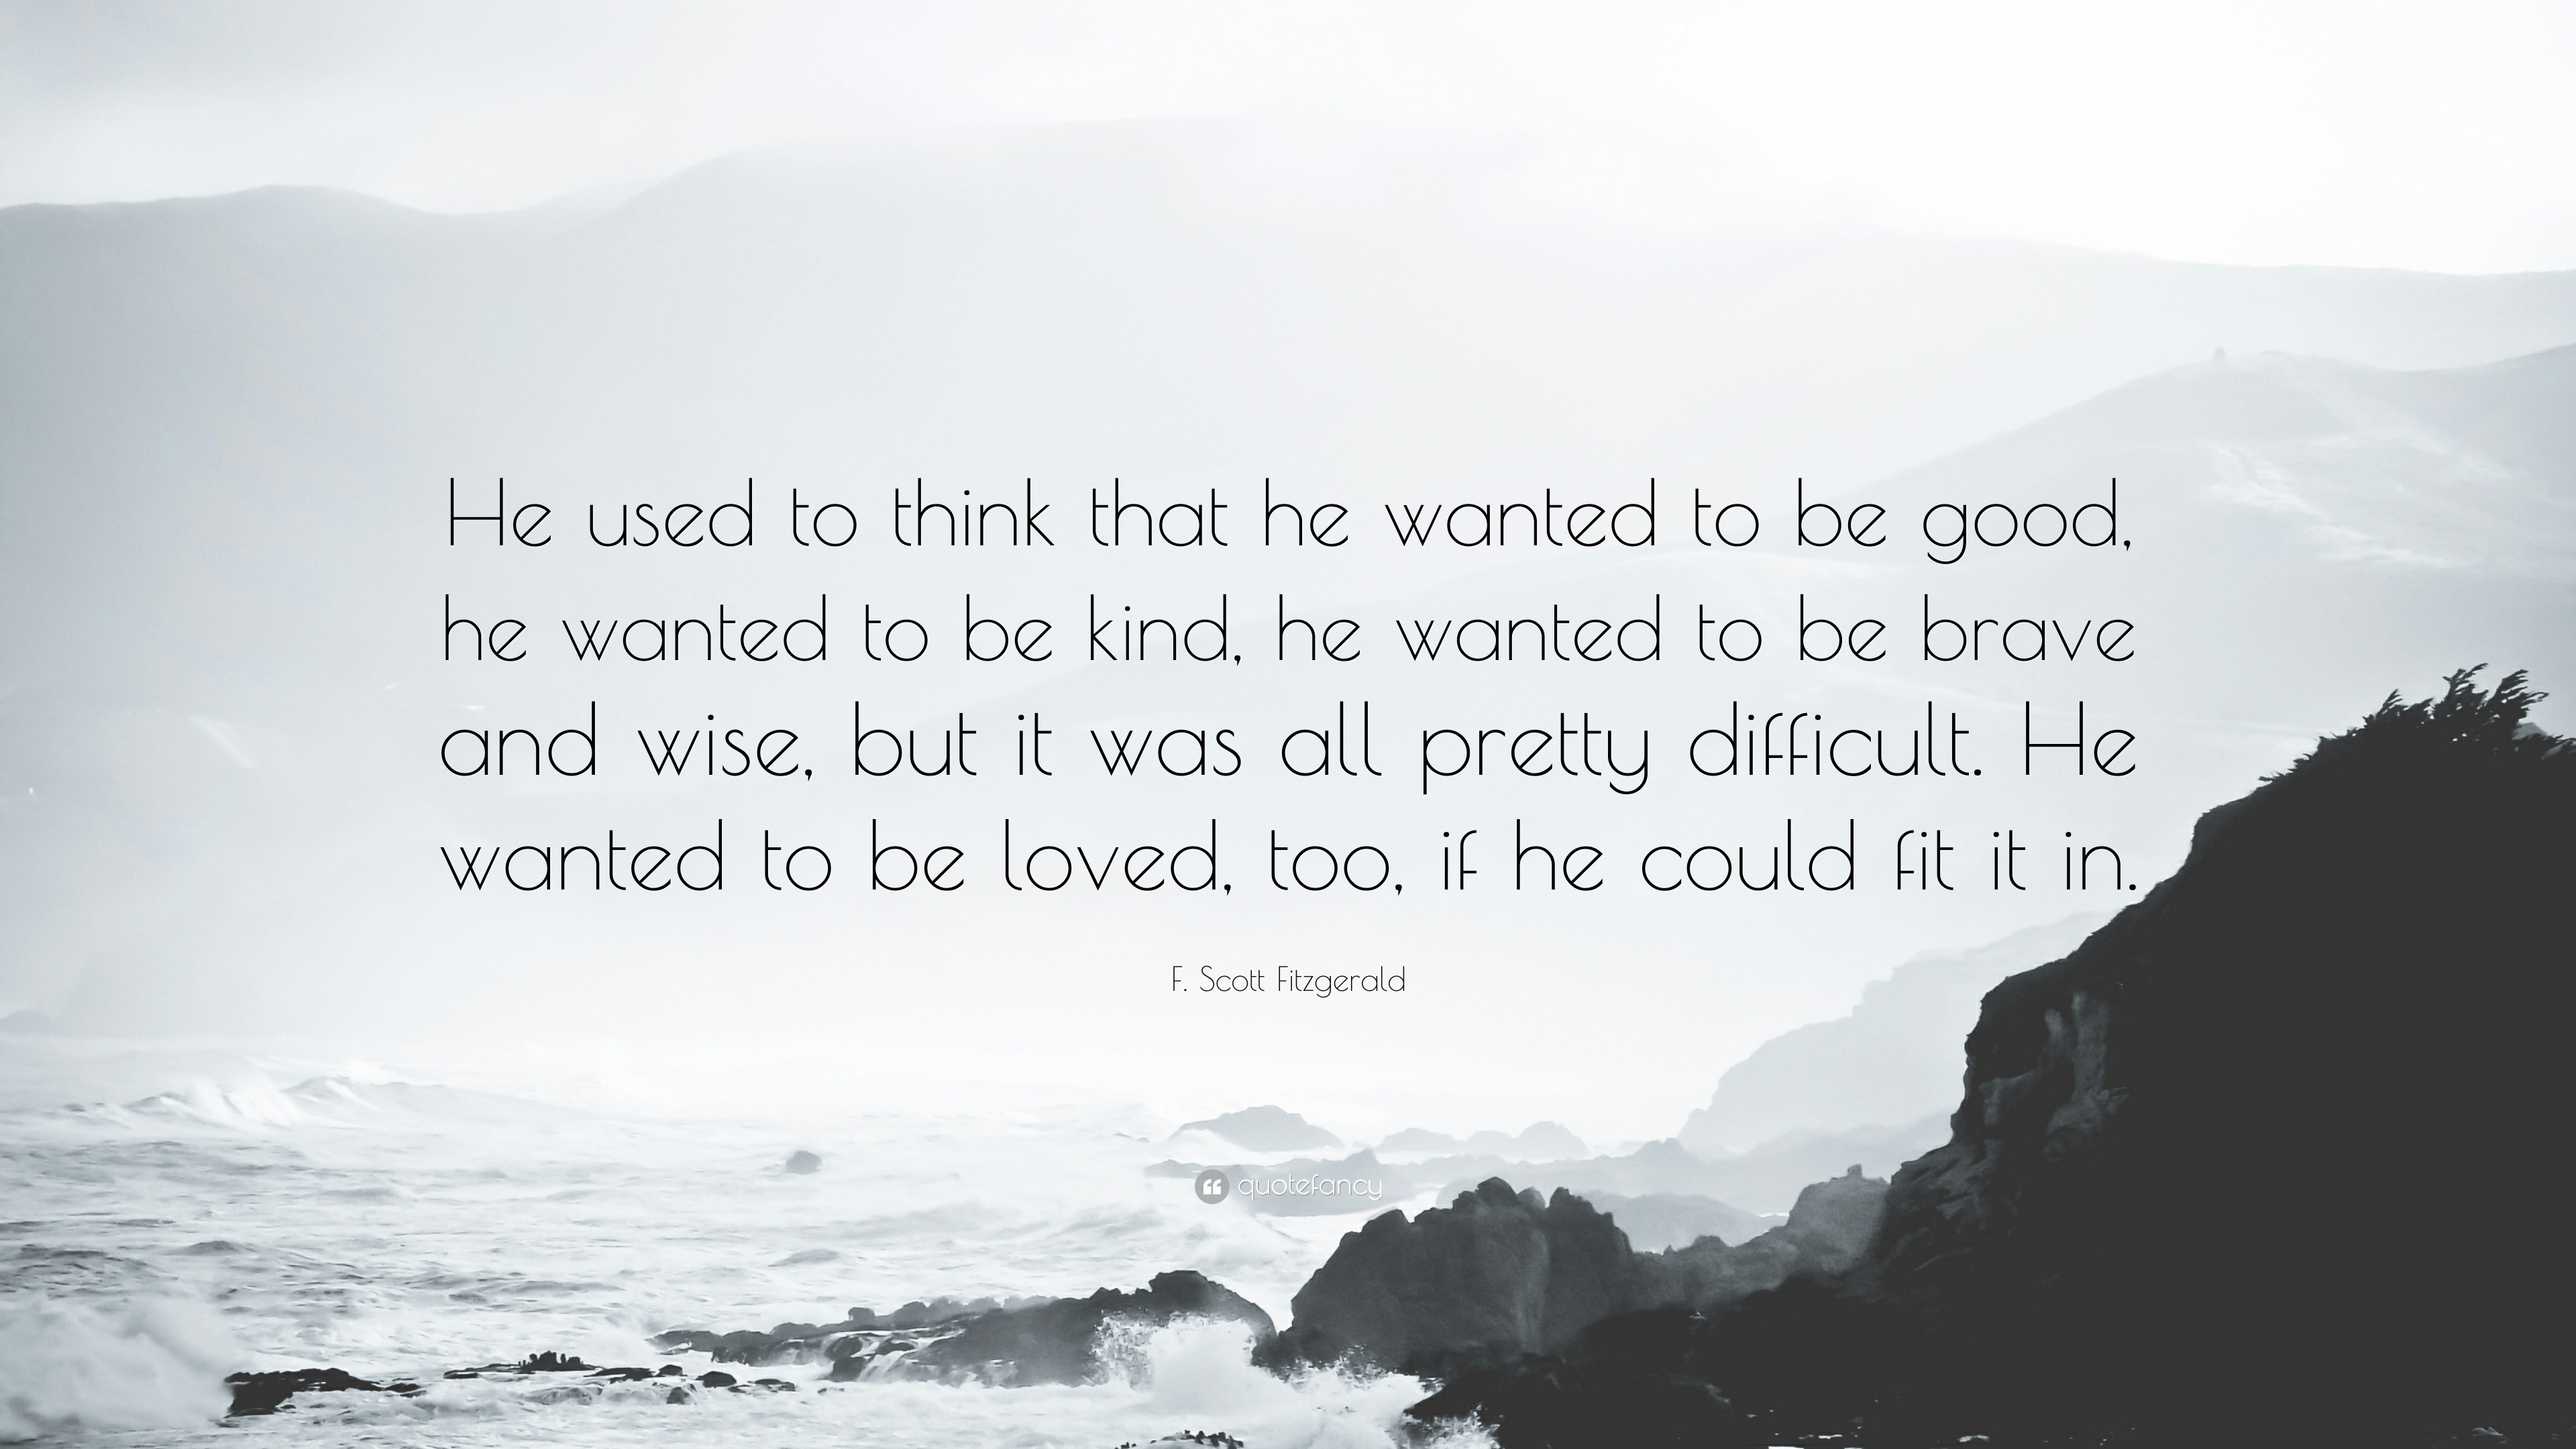 F. Scott Fitzgerald Quote: “He used to think that he wanted to be good, he wanted to be kind, he wanted to be and wise, but it was all pretty ...”